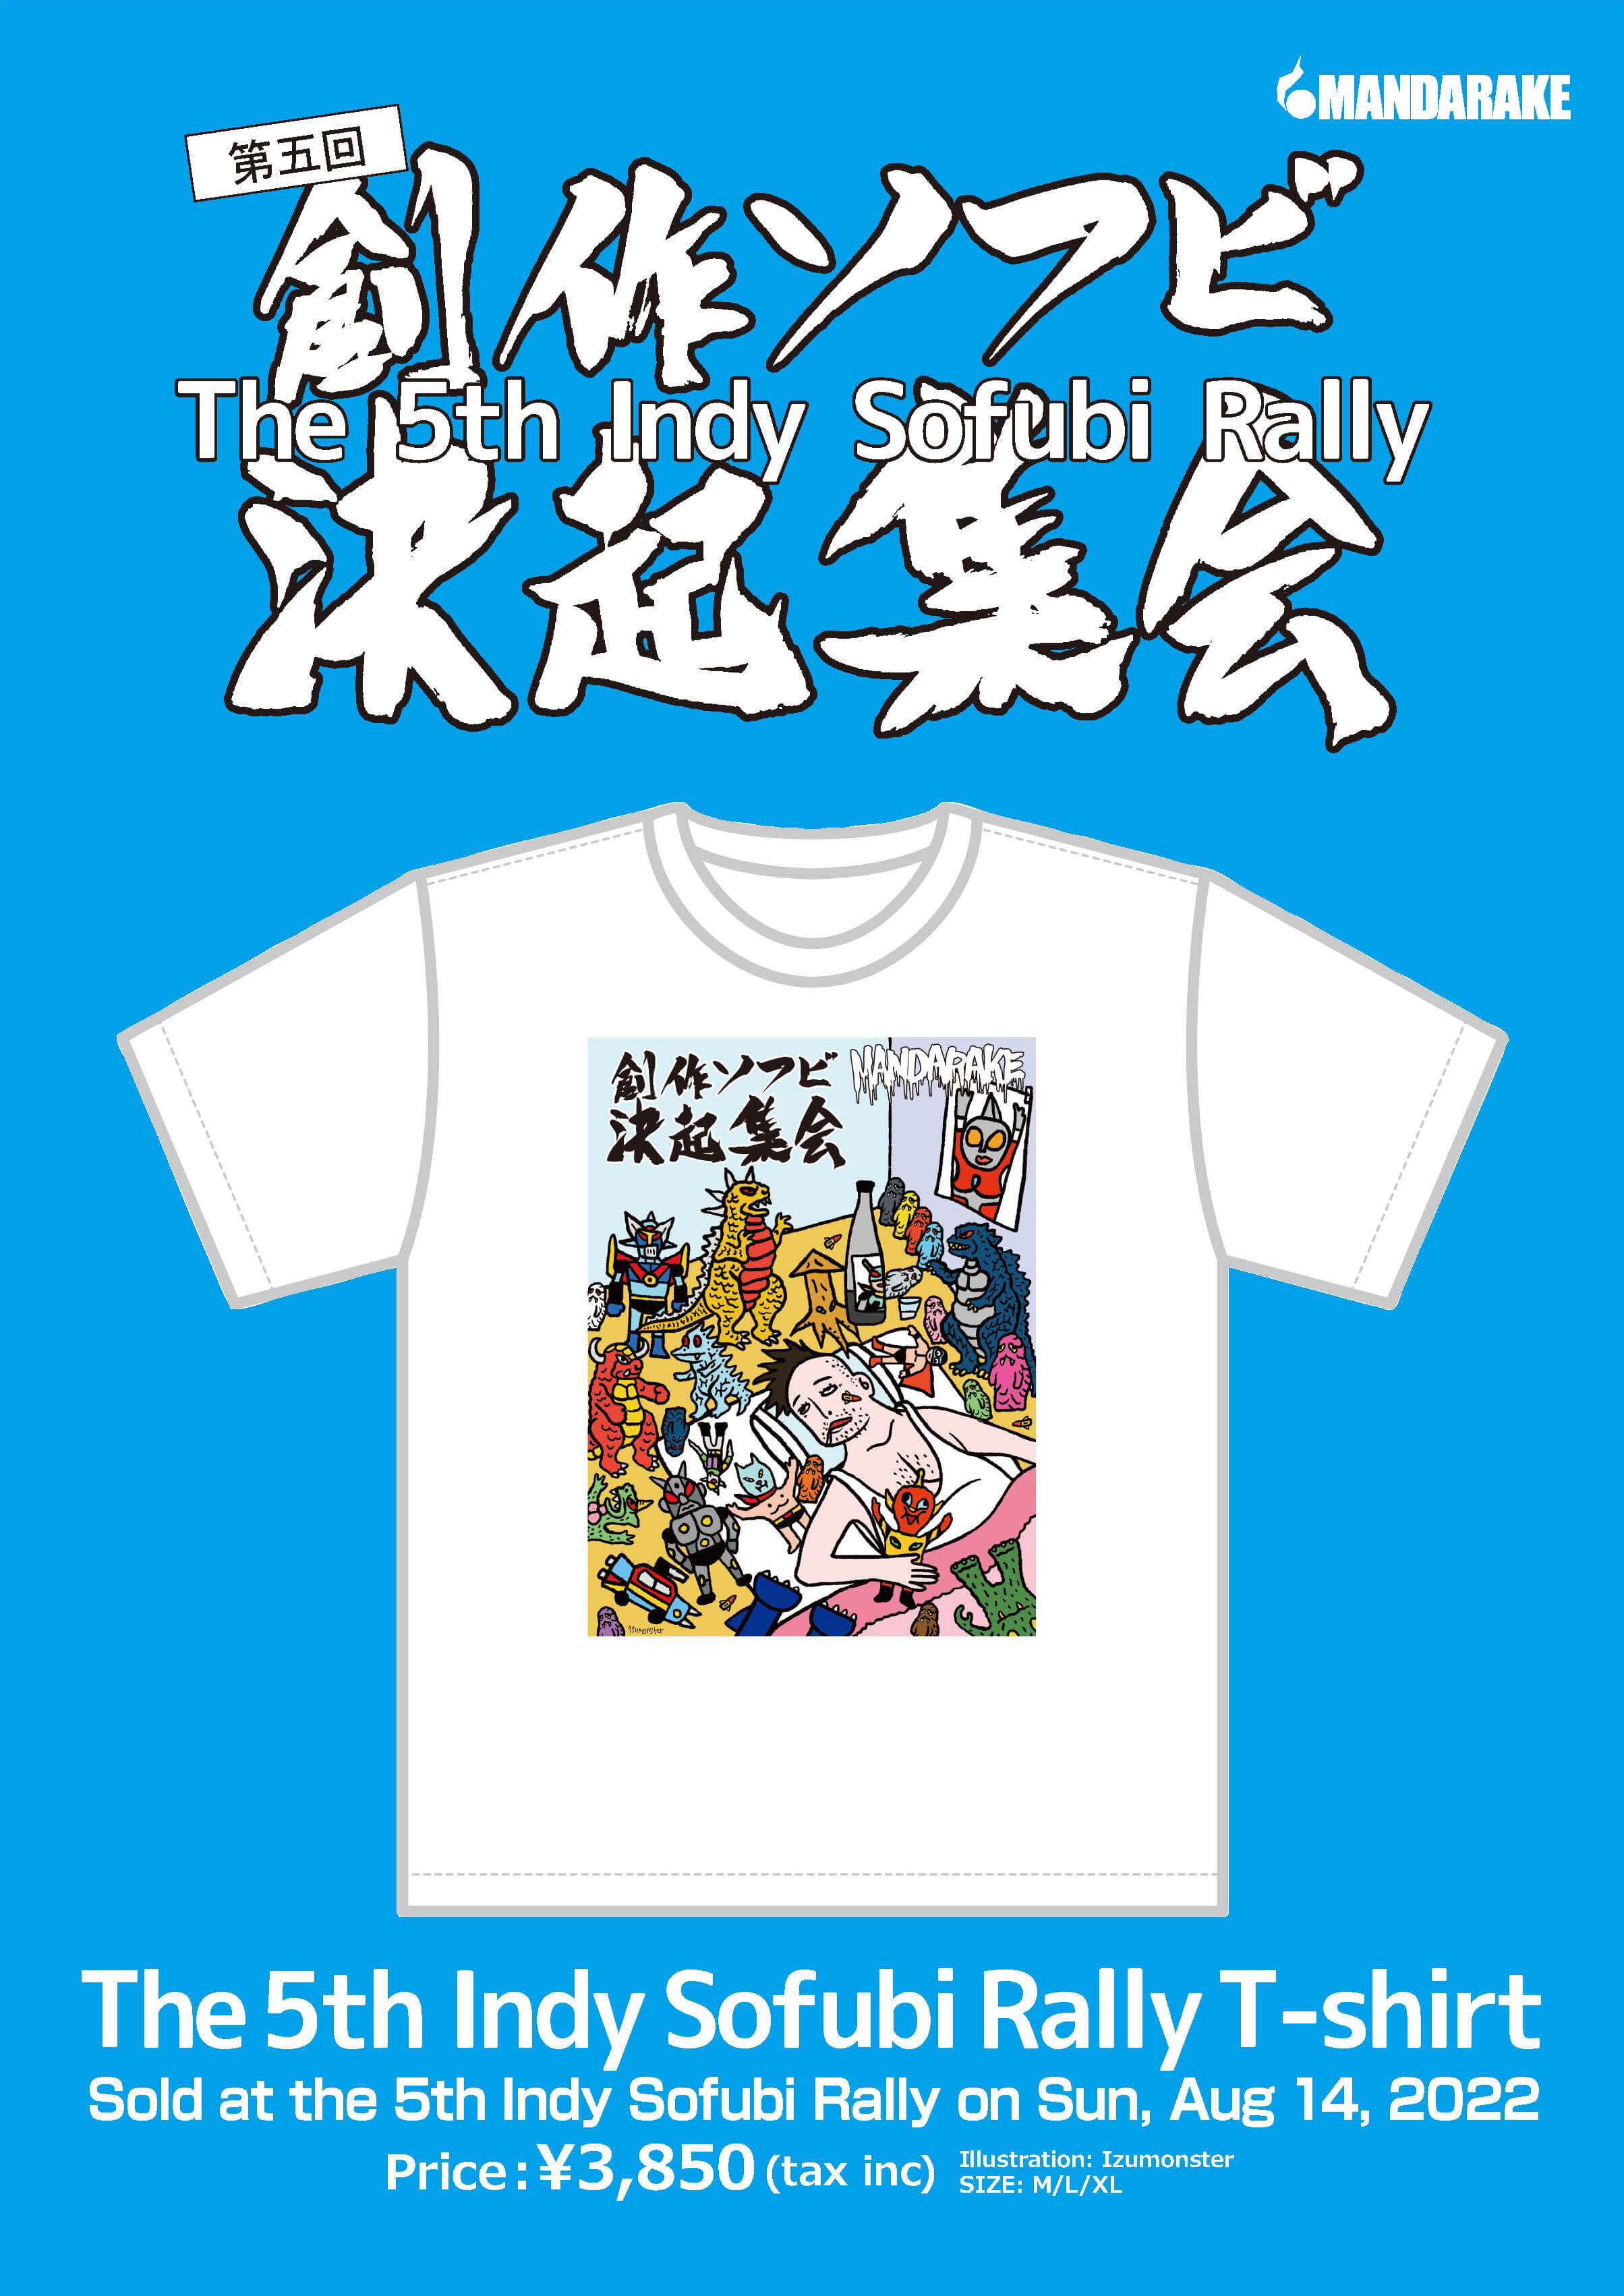 The 5th Indy Sofubi Rally T-shirt Sold at the 4th Inst Sofubi Rally on August 14, 2022 (Sun) ¥3,300 (tax inc)